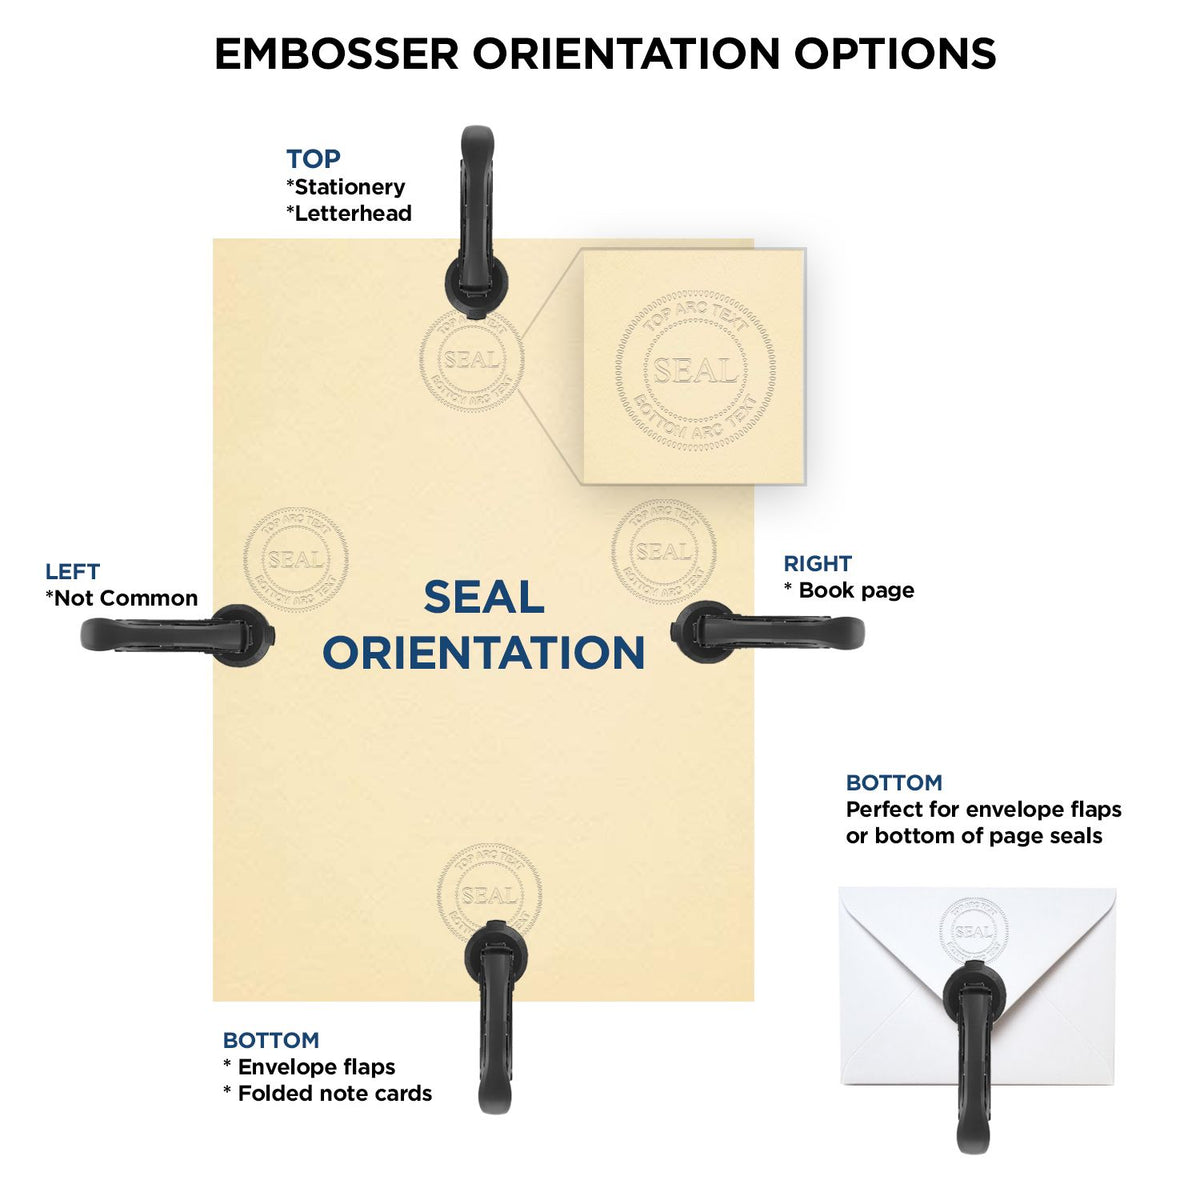 An infographic for the Handheld Guam Professional Engineer Embosser showing embosser orientation, this is showing examples of a top, bottom, right and left insert.